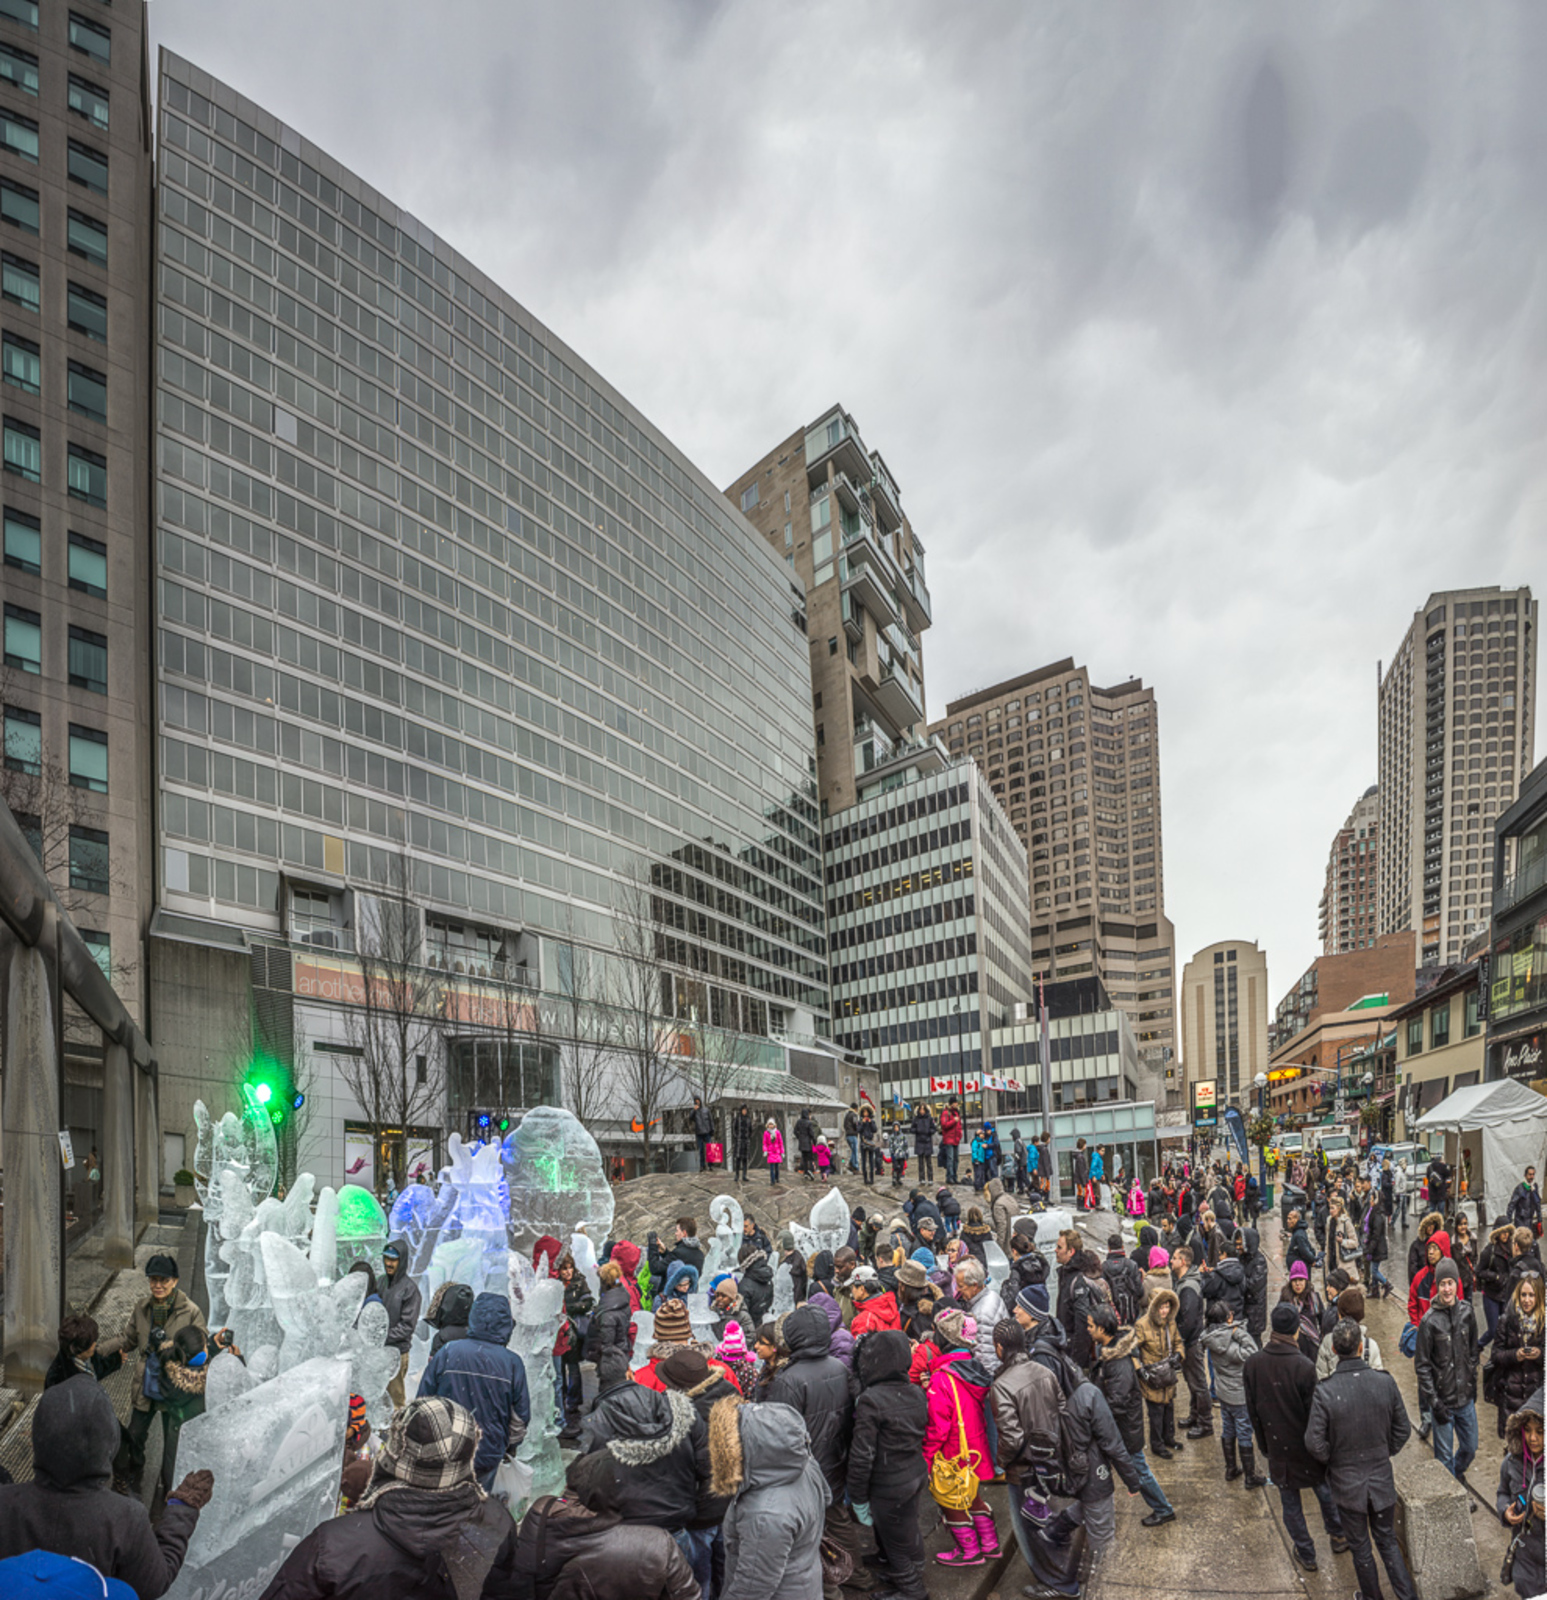 Toronto Icefest on Bloor attracts crowds